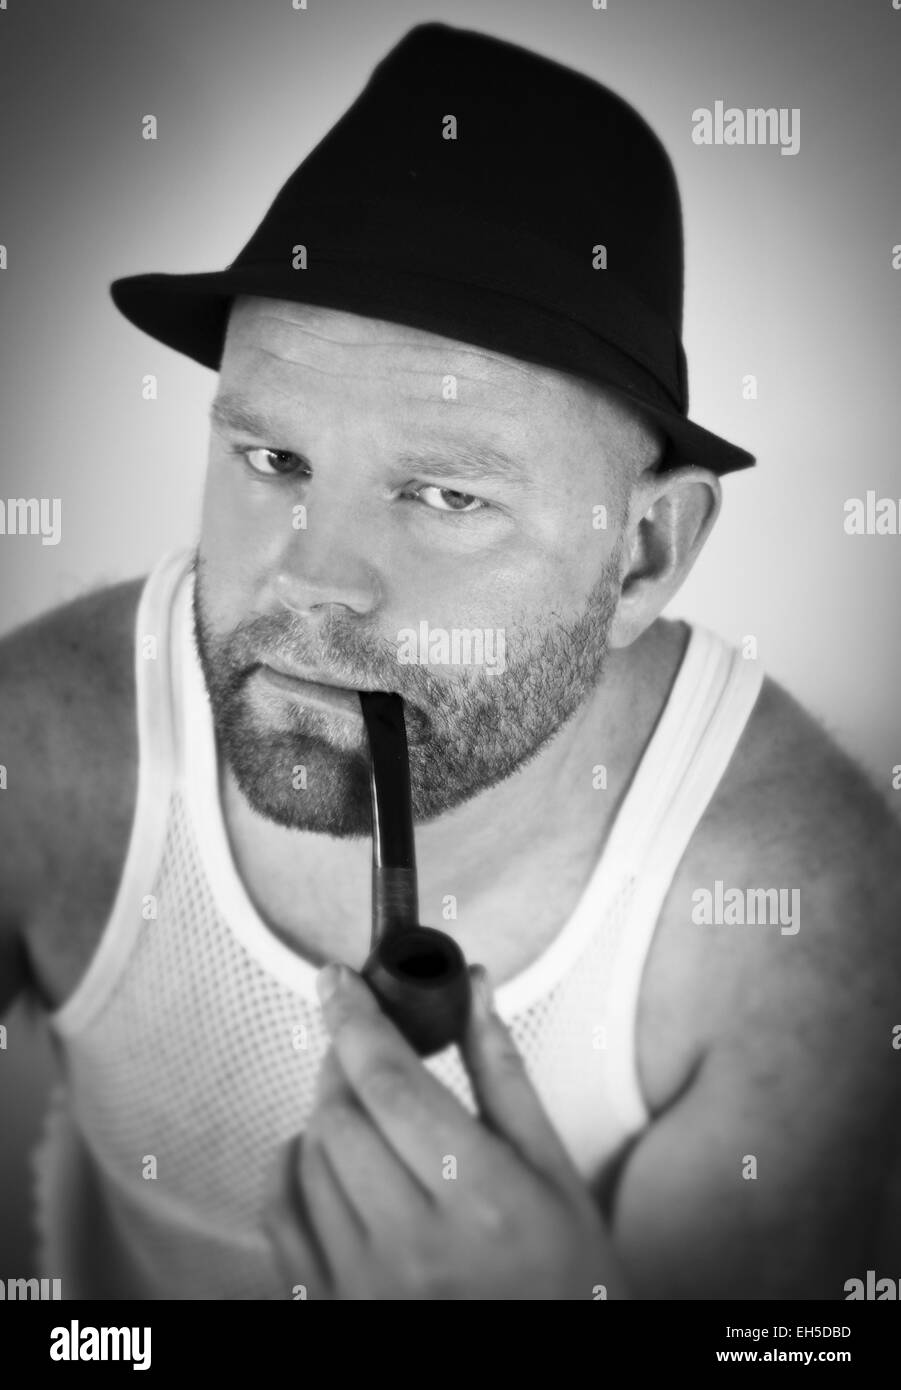 Man smoking tobacco pipe, with hat and singlet. Stock Photo